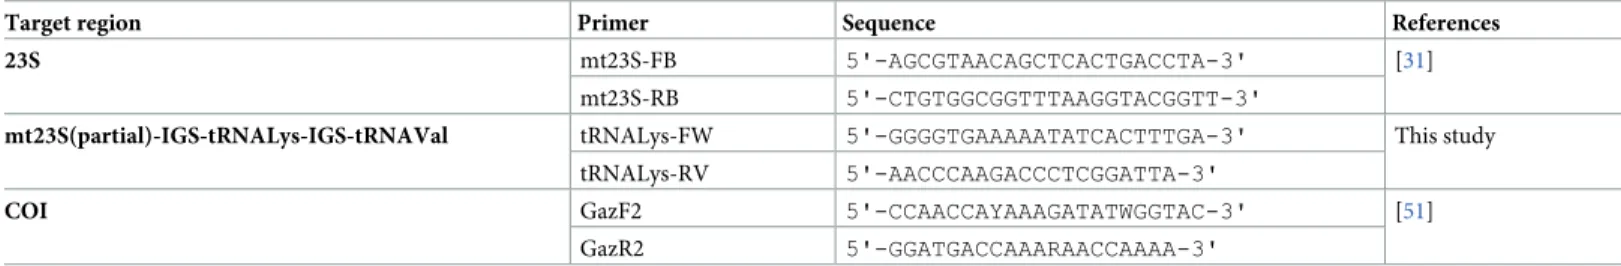 Table 1. Molecular markers used in this study. Locus name and target region, forward and reverse primer sequences, and references.